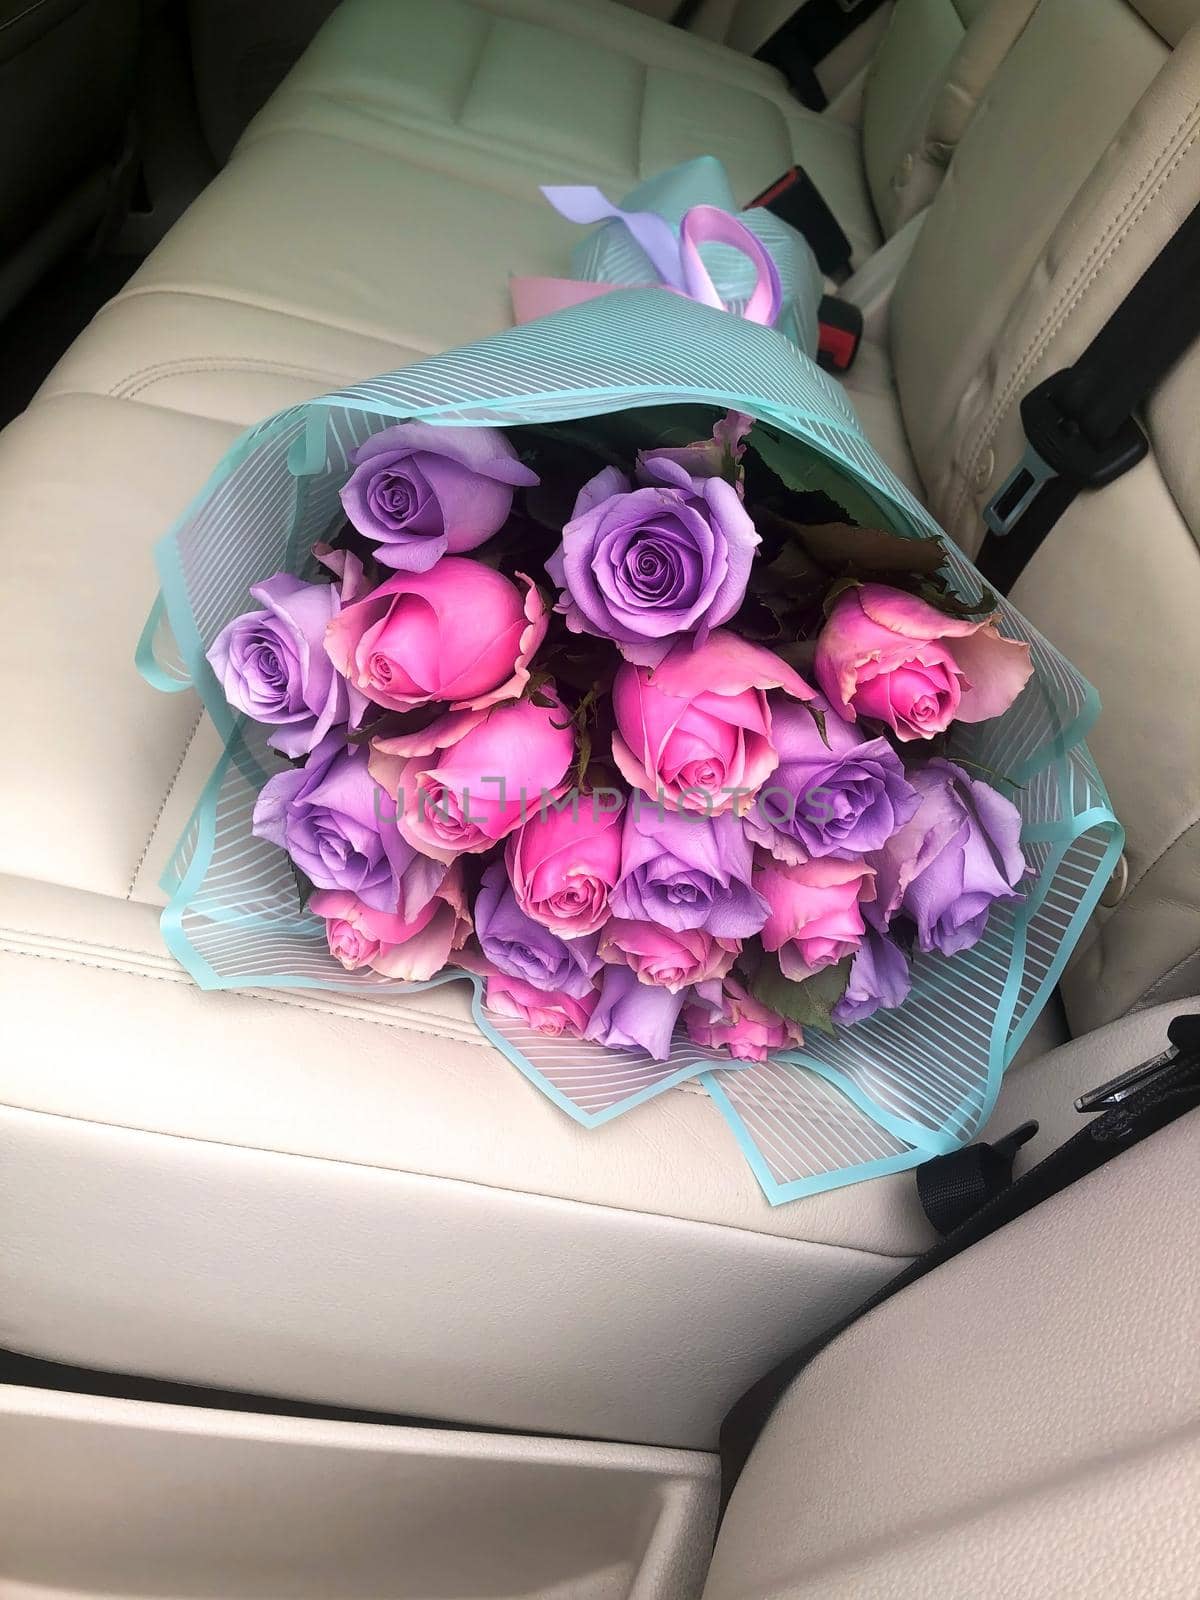 a bouquet of flowers lies on the light leather back seat of the car. by Suietska